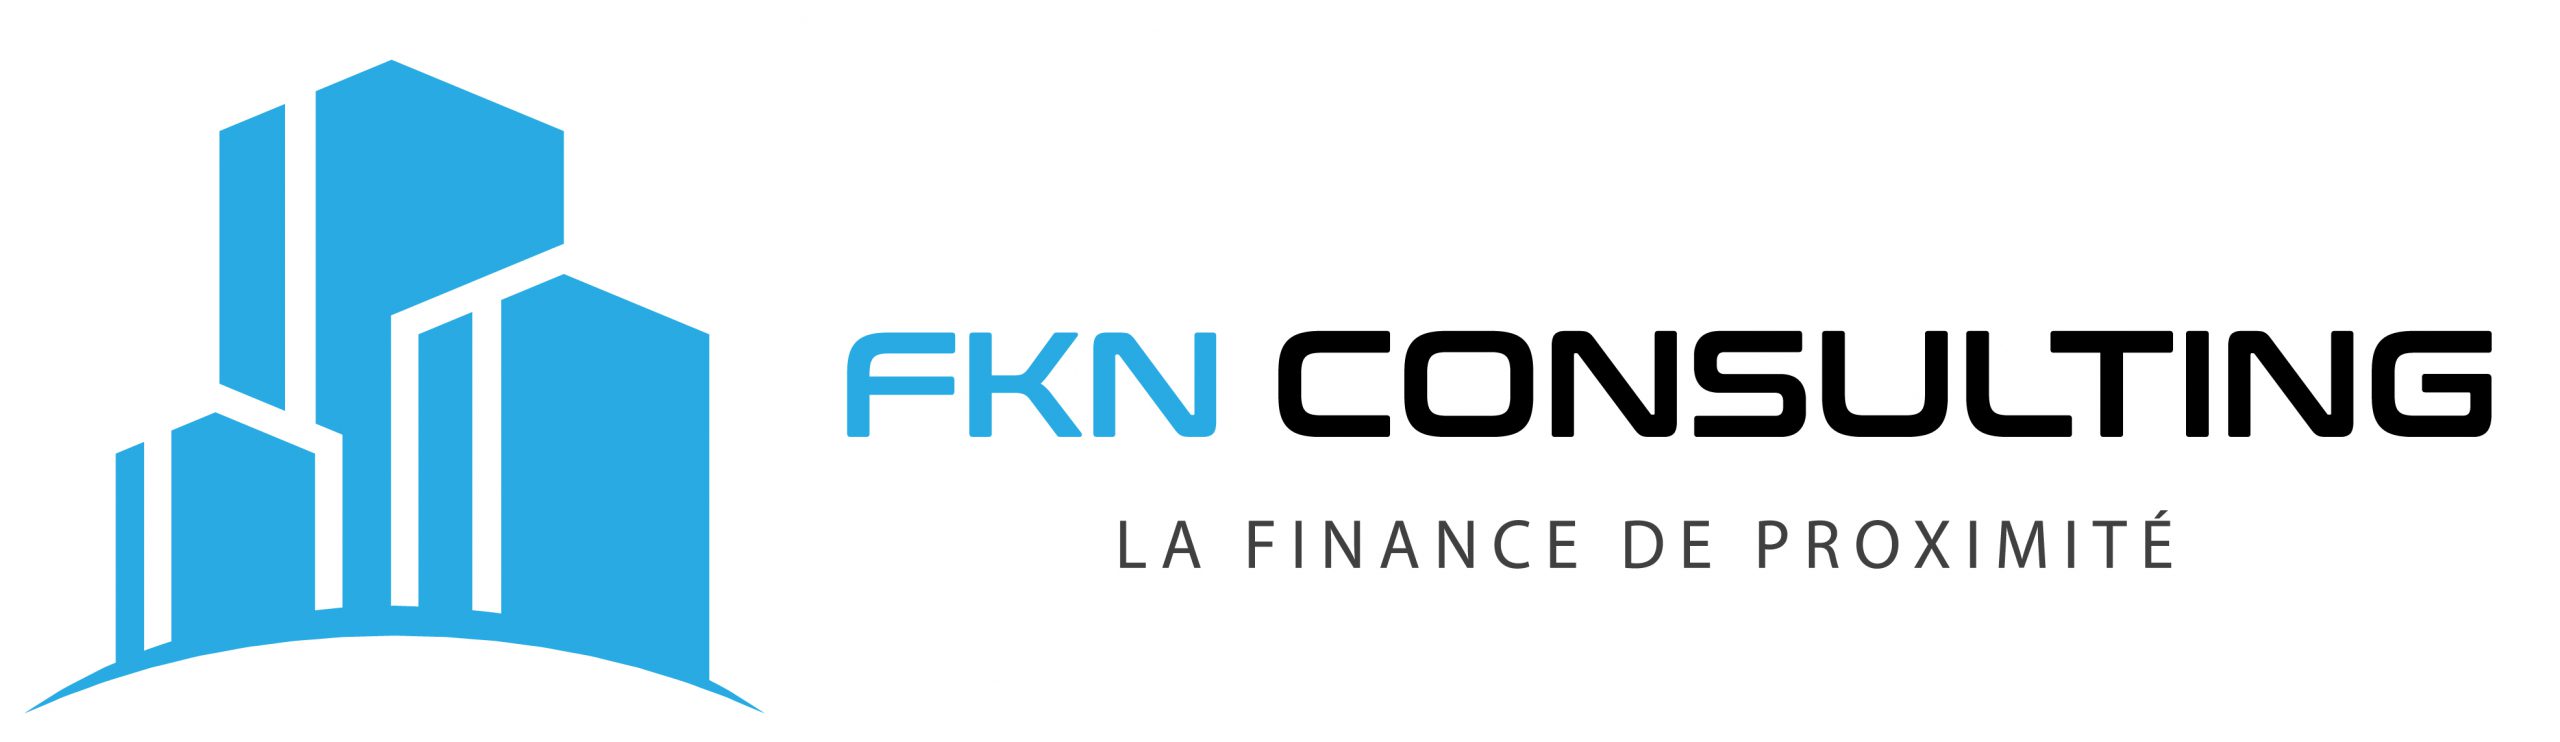 fkn-consulting.fr